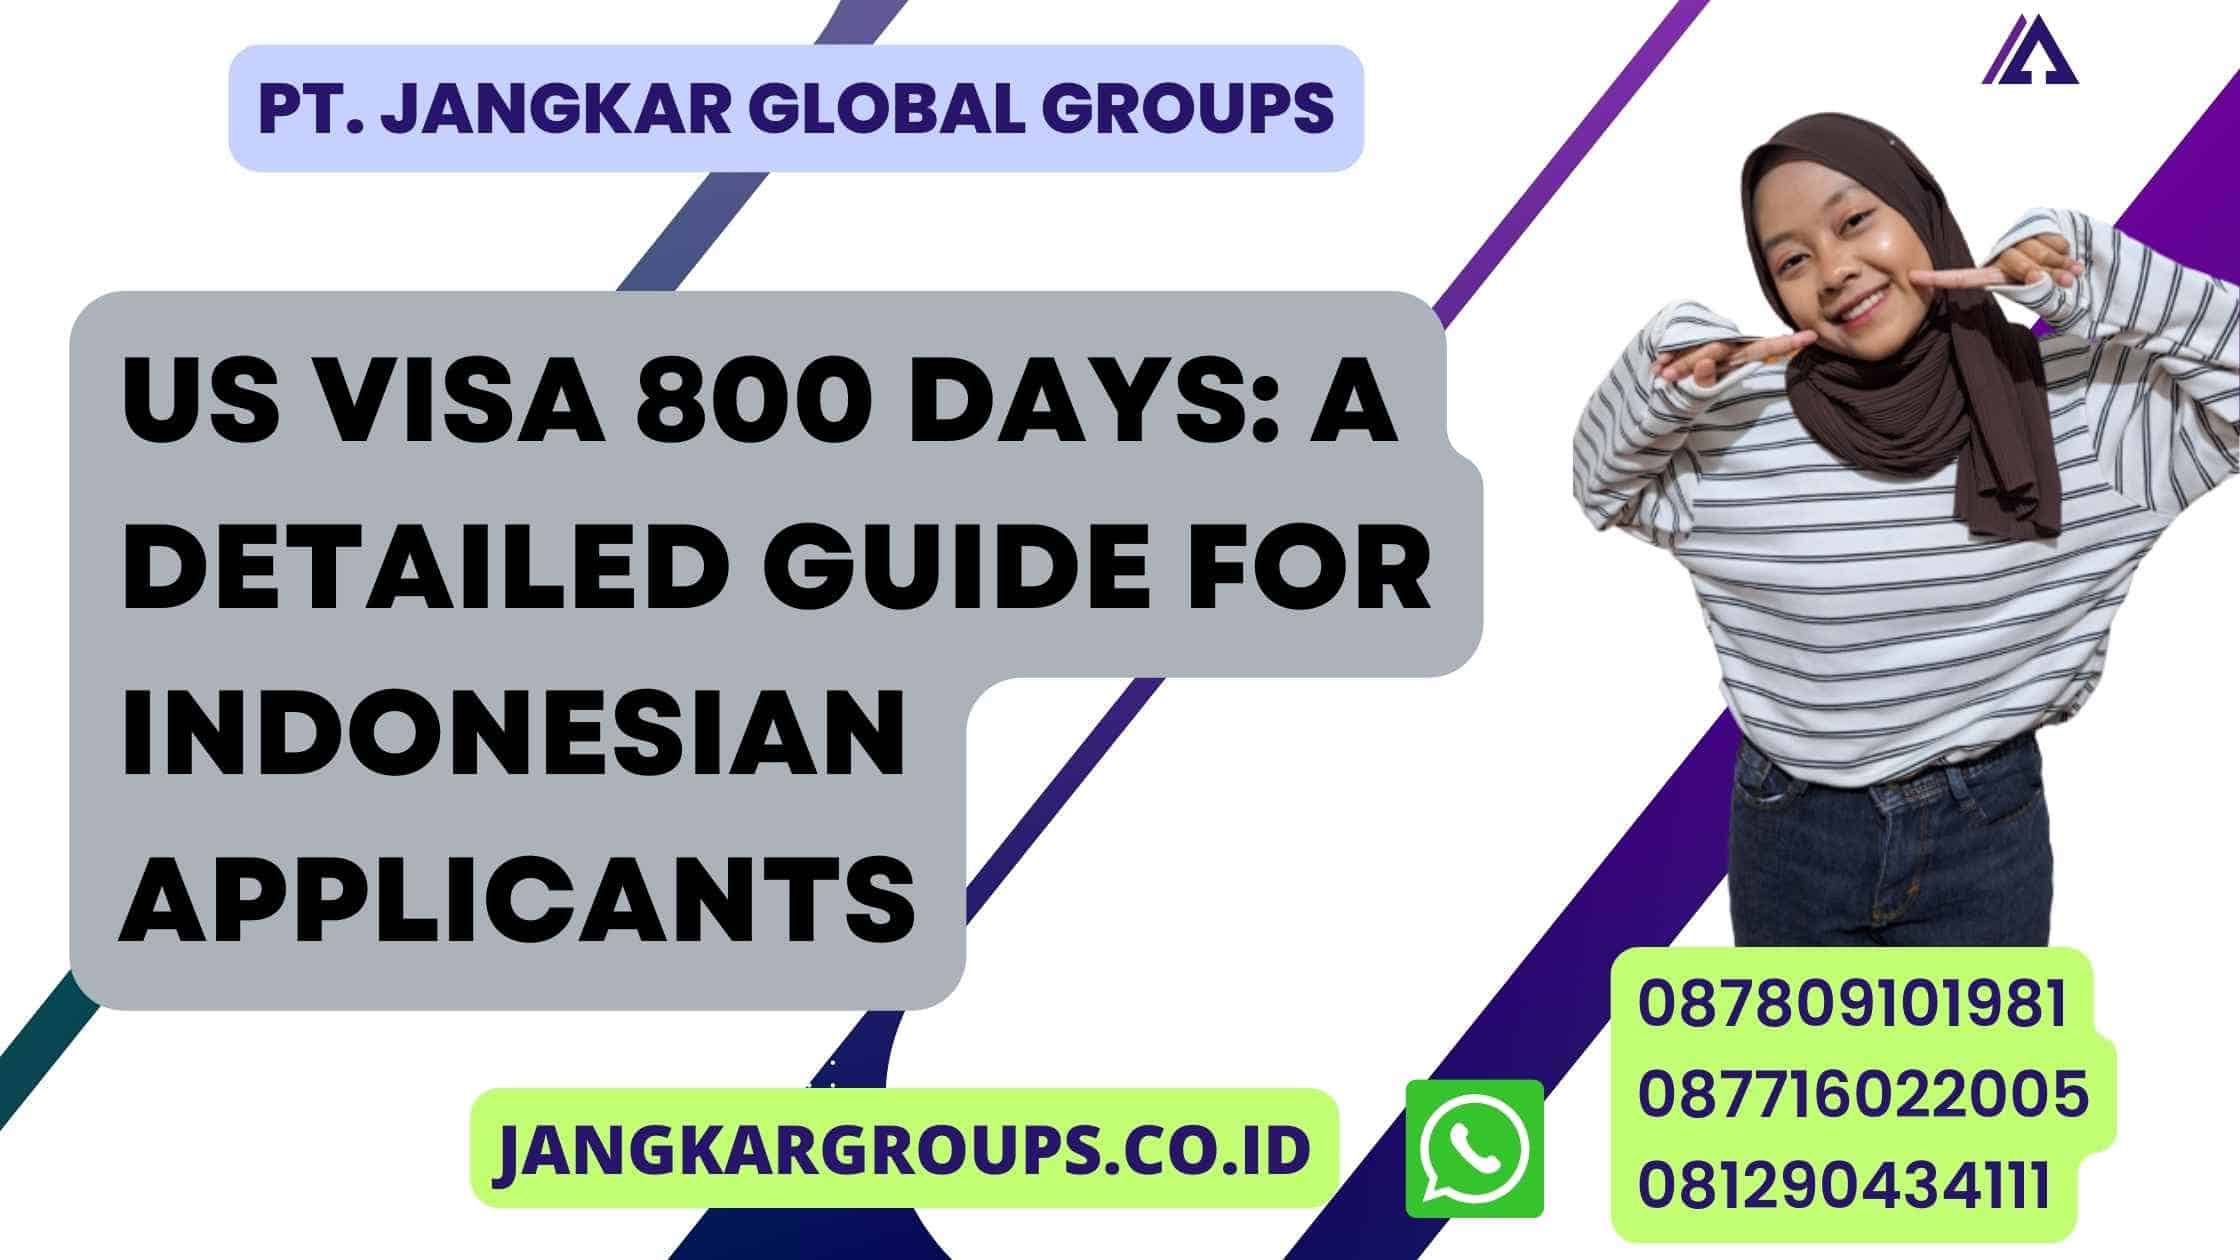 US Visa 800 Days: A Detailed Guide for Indonesian Applicants